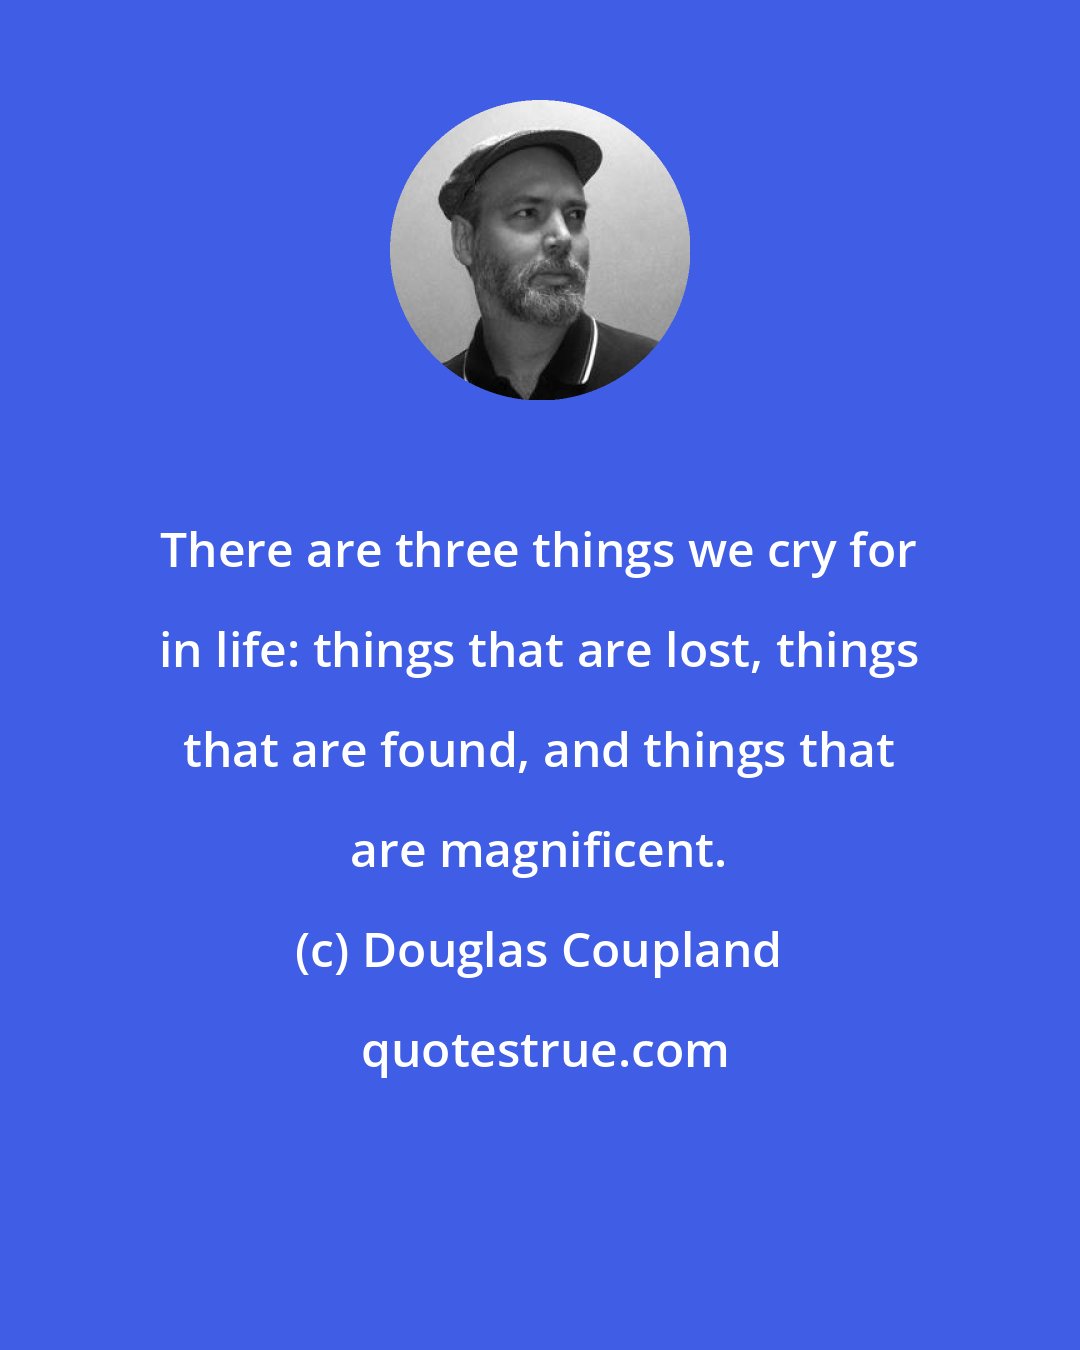 Douglas Coupland: There are three things we cry for in life: things that are lost, things that are found, and things that are magnificent.